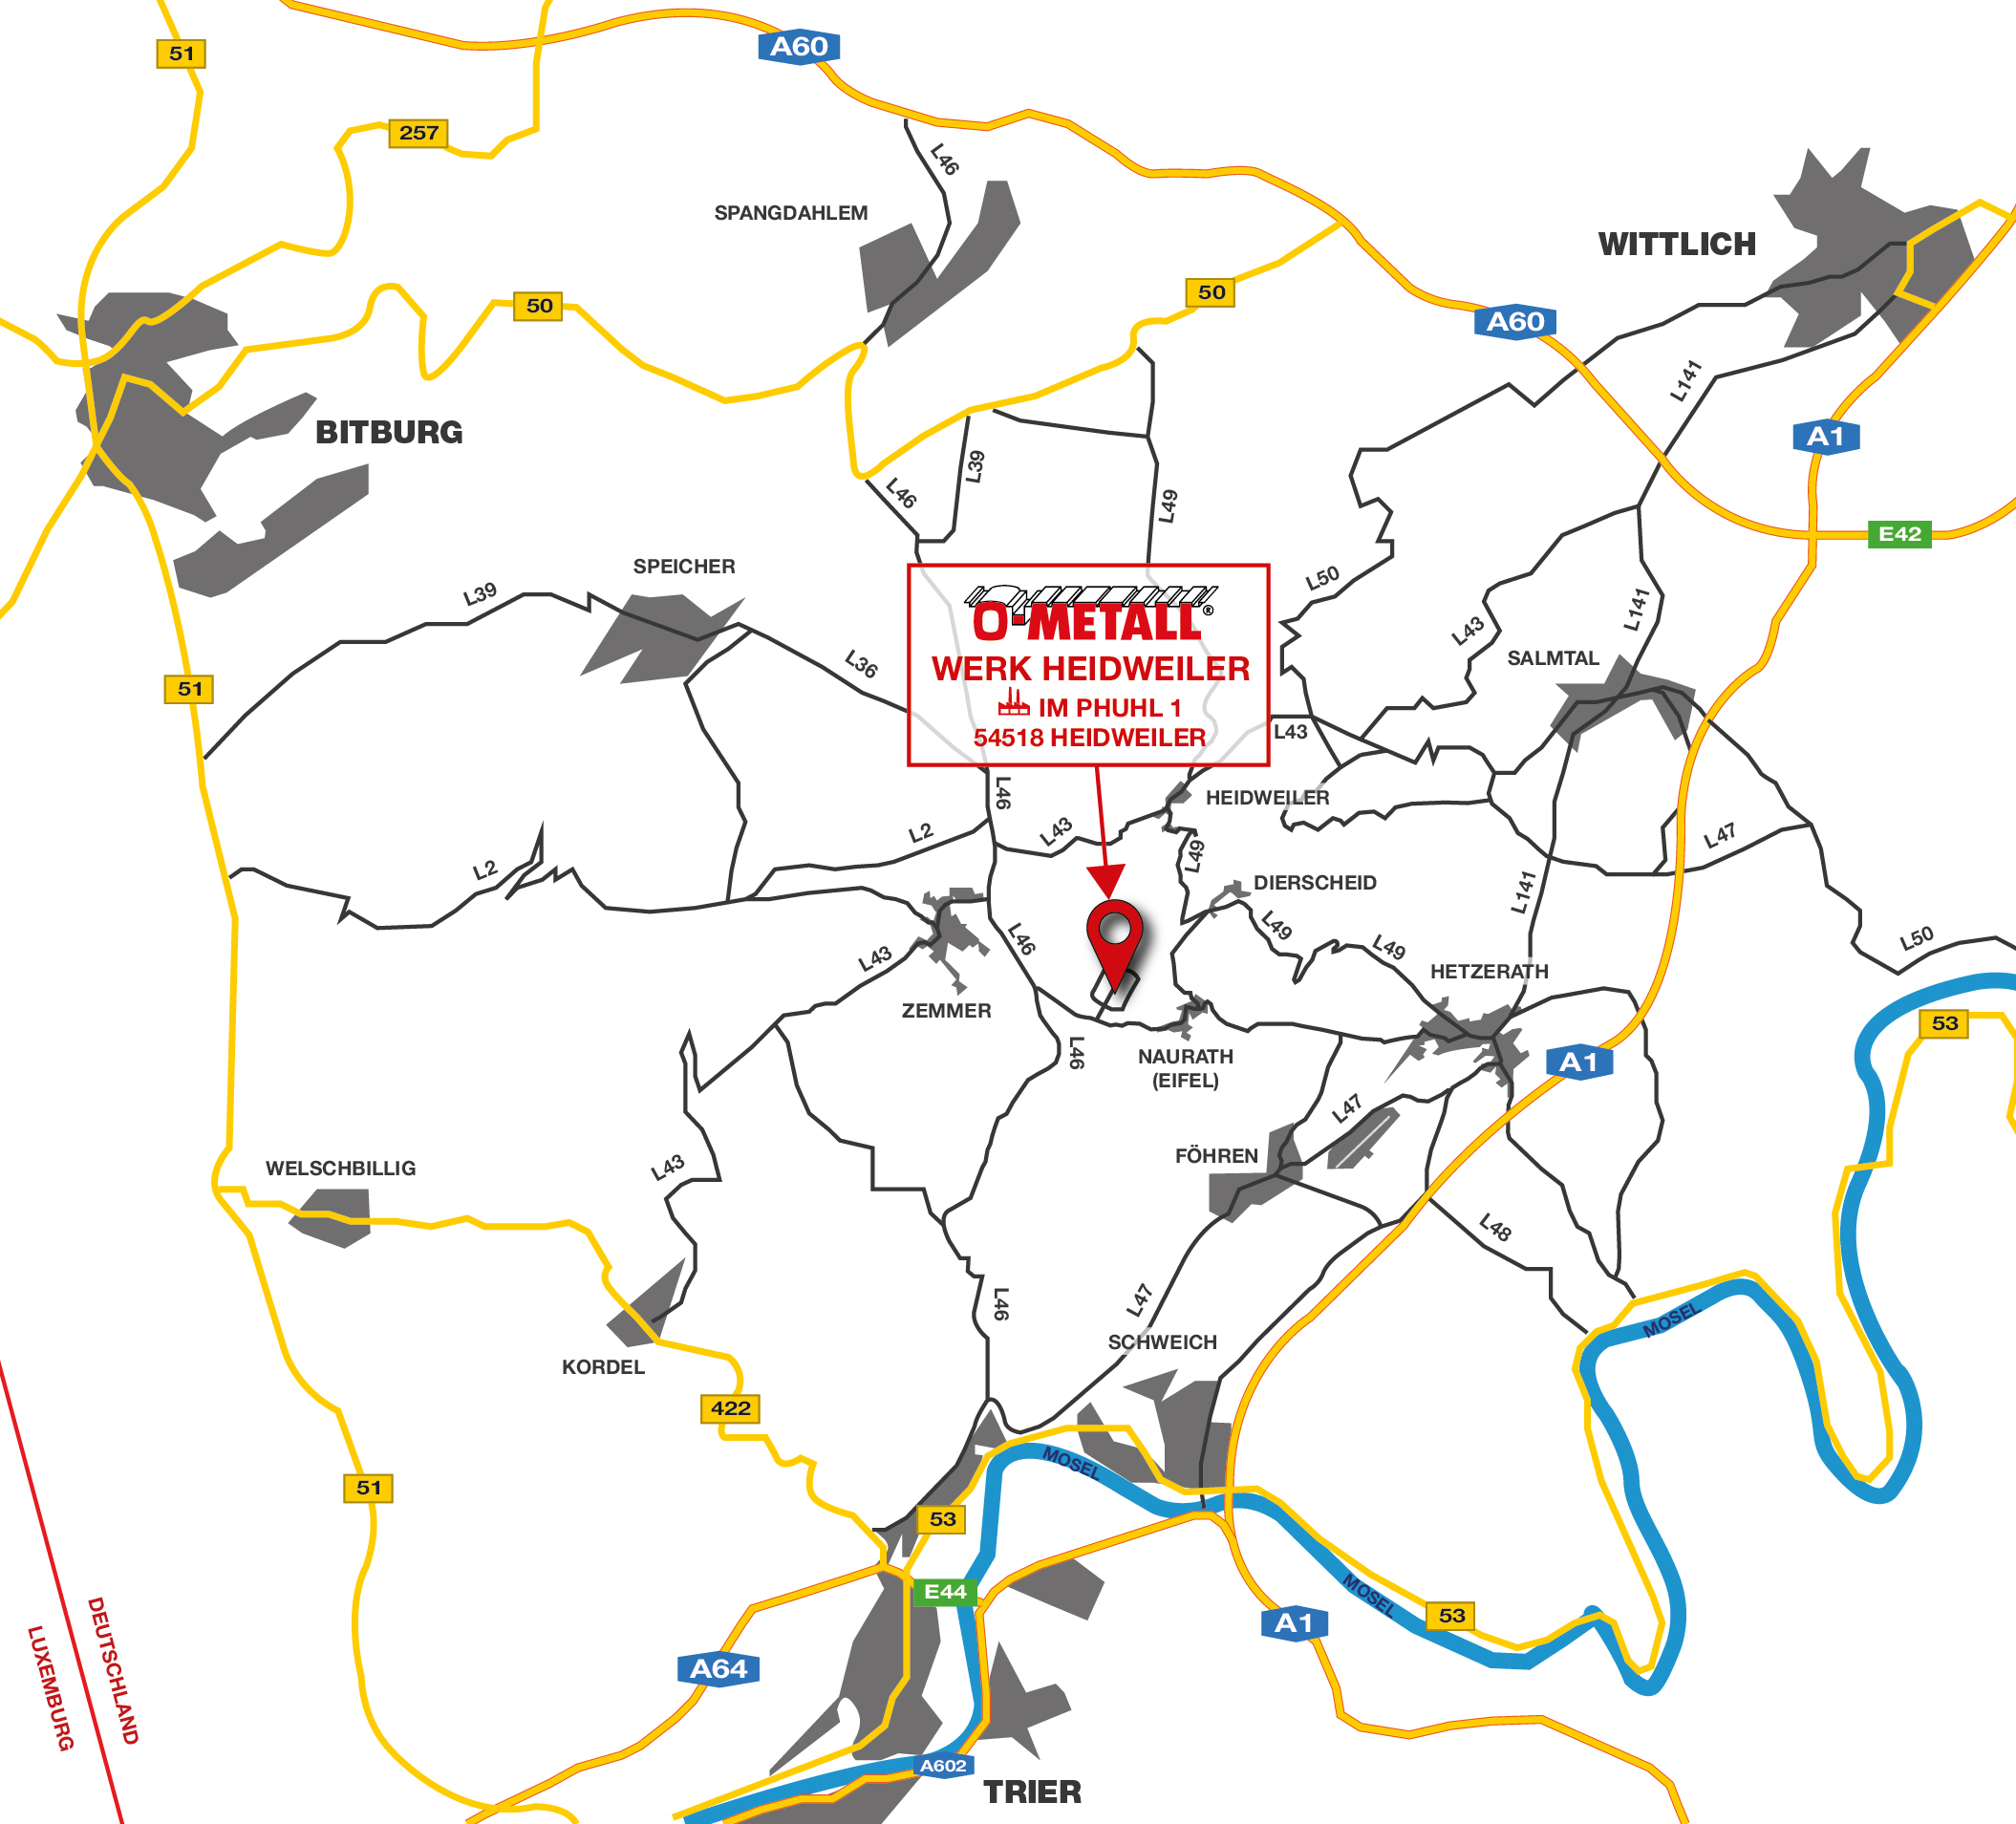 Map displaying location of the O-METALL site Heidweiler and the surrounding region